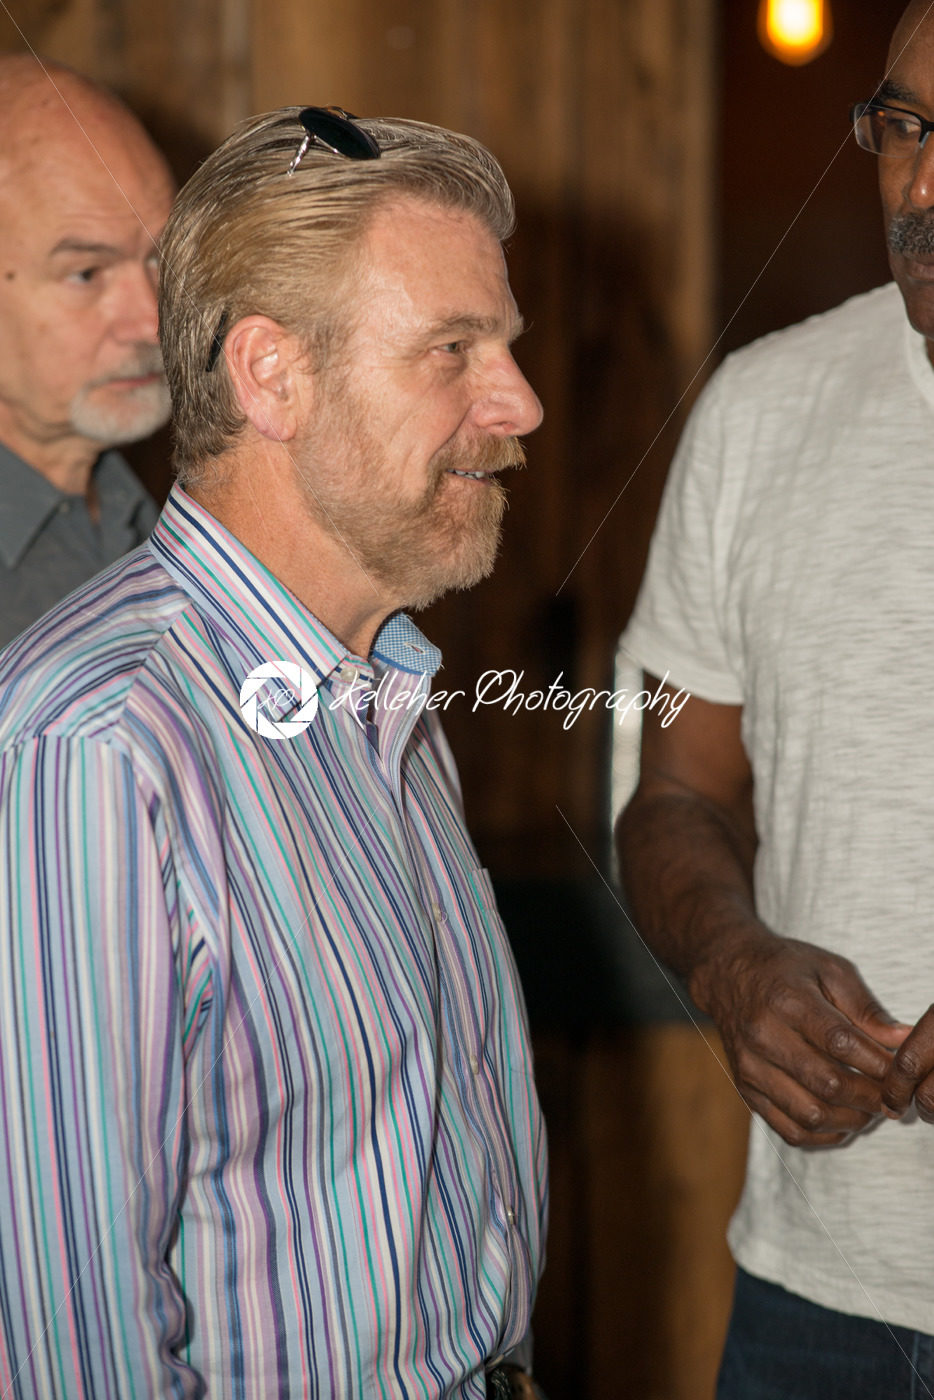 VALLEY FORGE CASINO, KING OF PRUSSIA, PA – JULY 15: Sportscaster Howard Eskin at Kendall’s Crusade fundraising event to raise awareness of Arteriovenus Malformations AVM on July 15, 2017 - Kelleher Photography Store